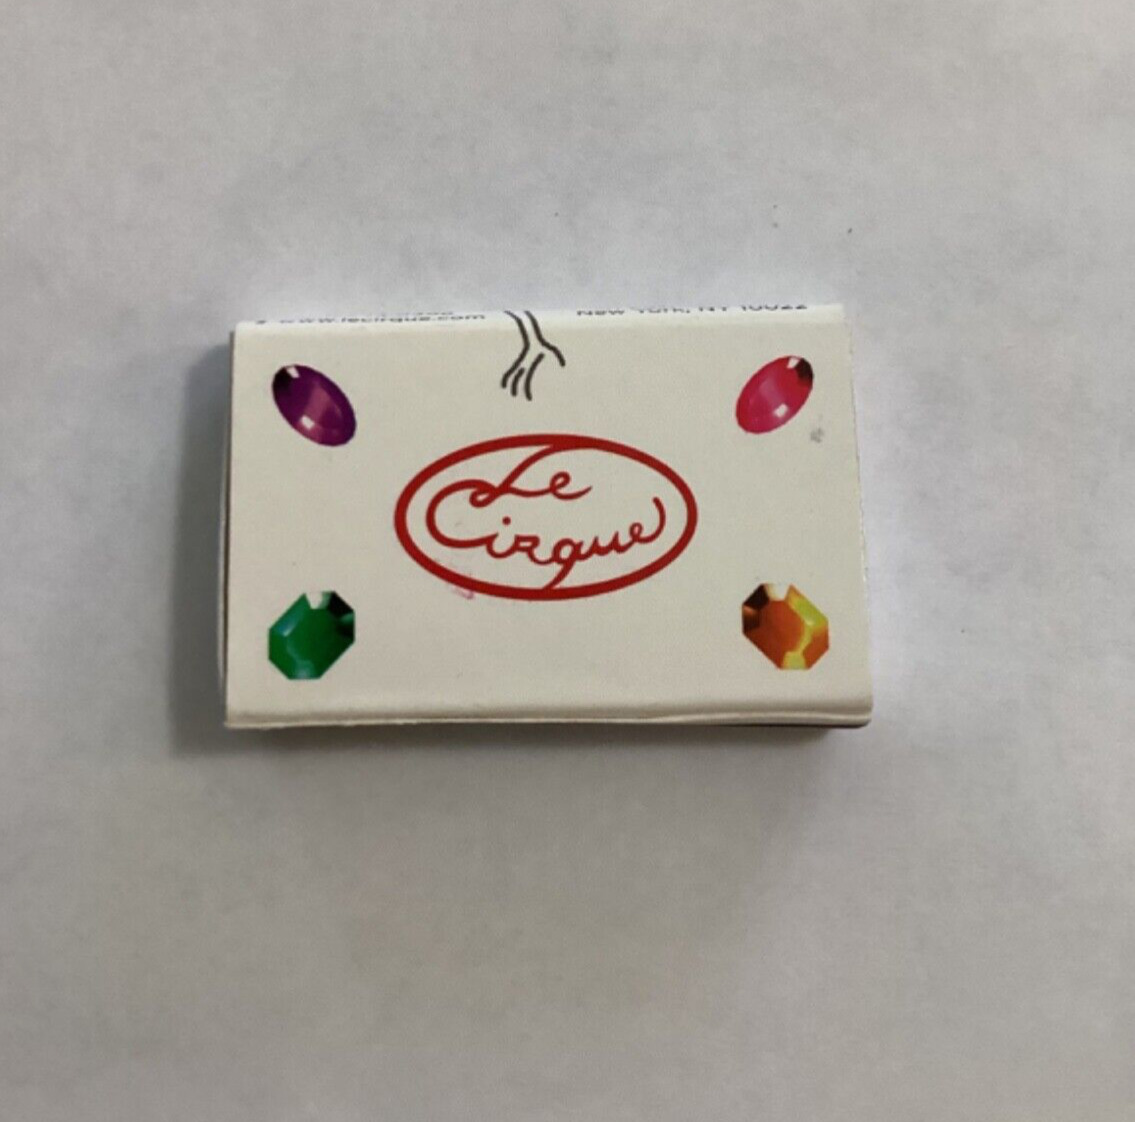 Vintage Le Cirque French Restaurant Matchbox New York NYC Advertising Matchbook